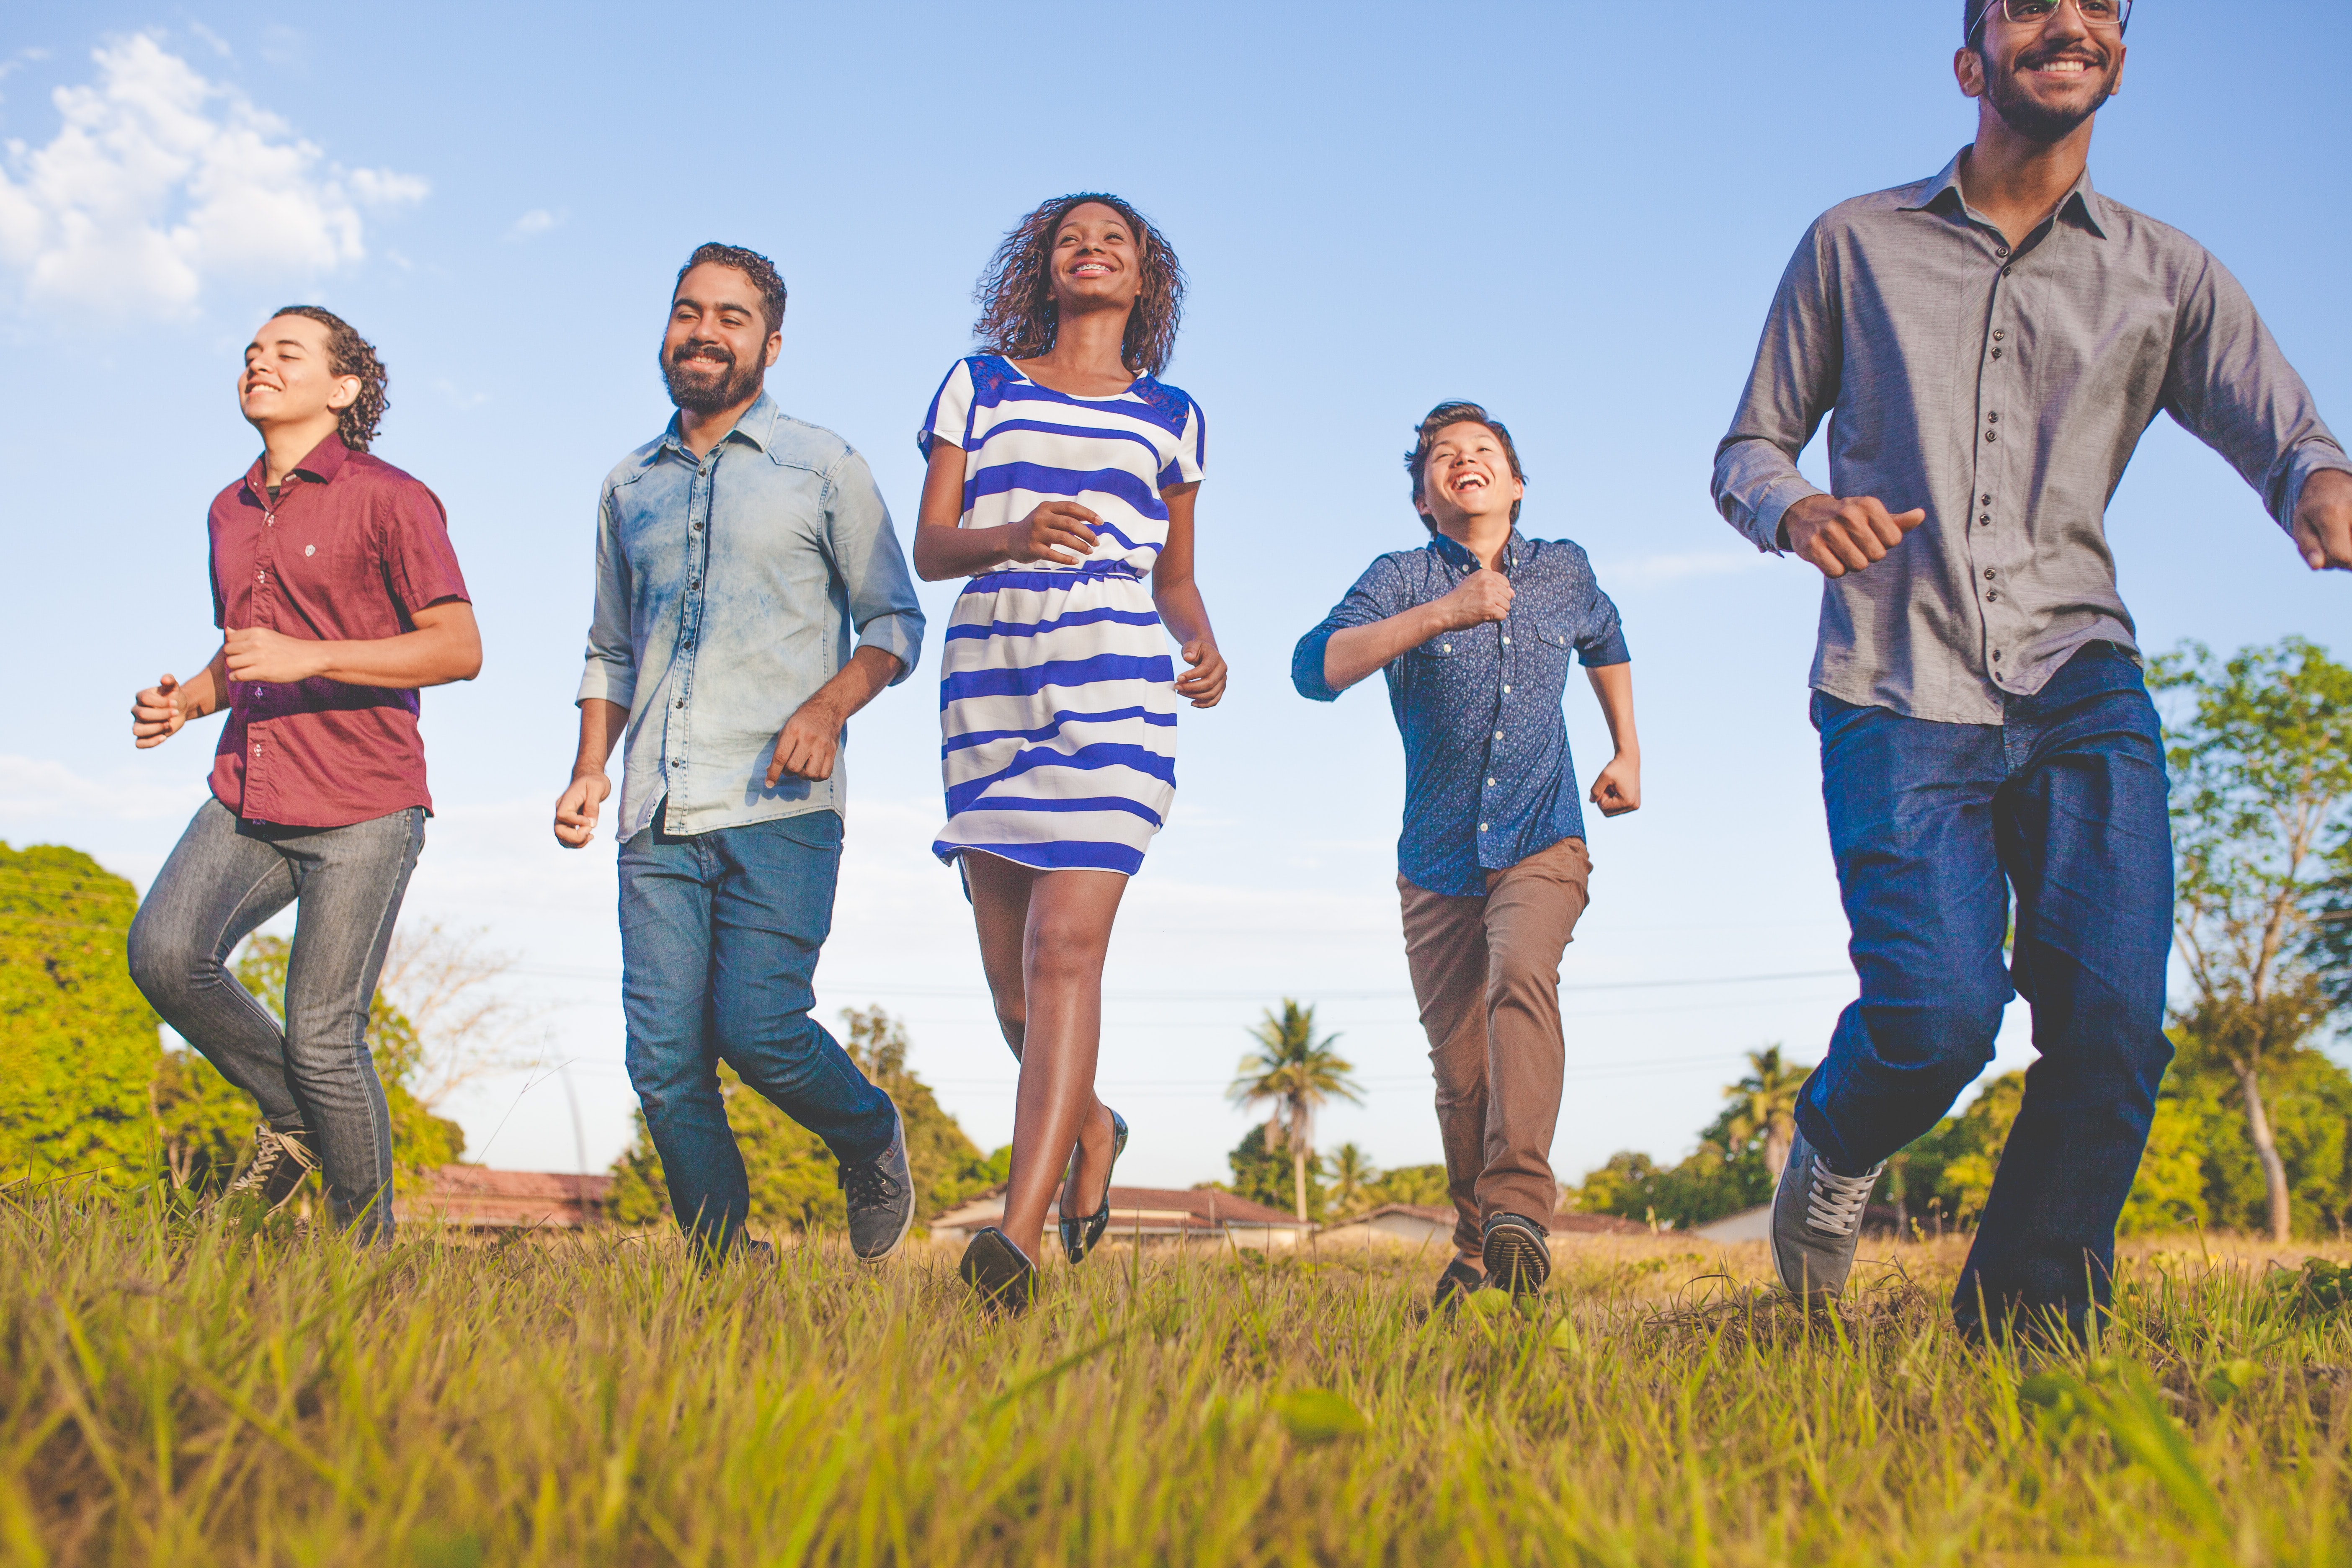 An ethnically diverse group of friends in casual clothes walking through a field toward the camera.